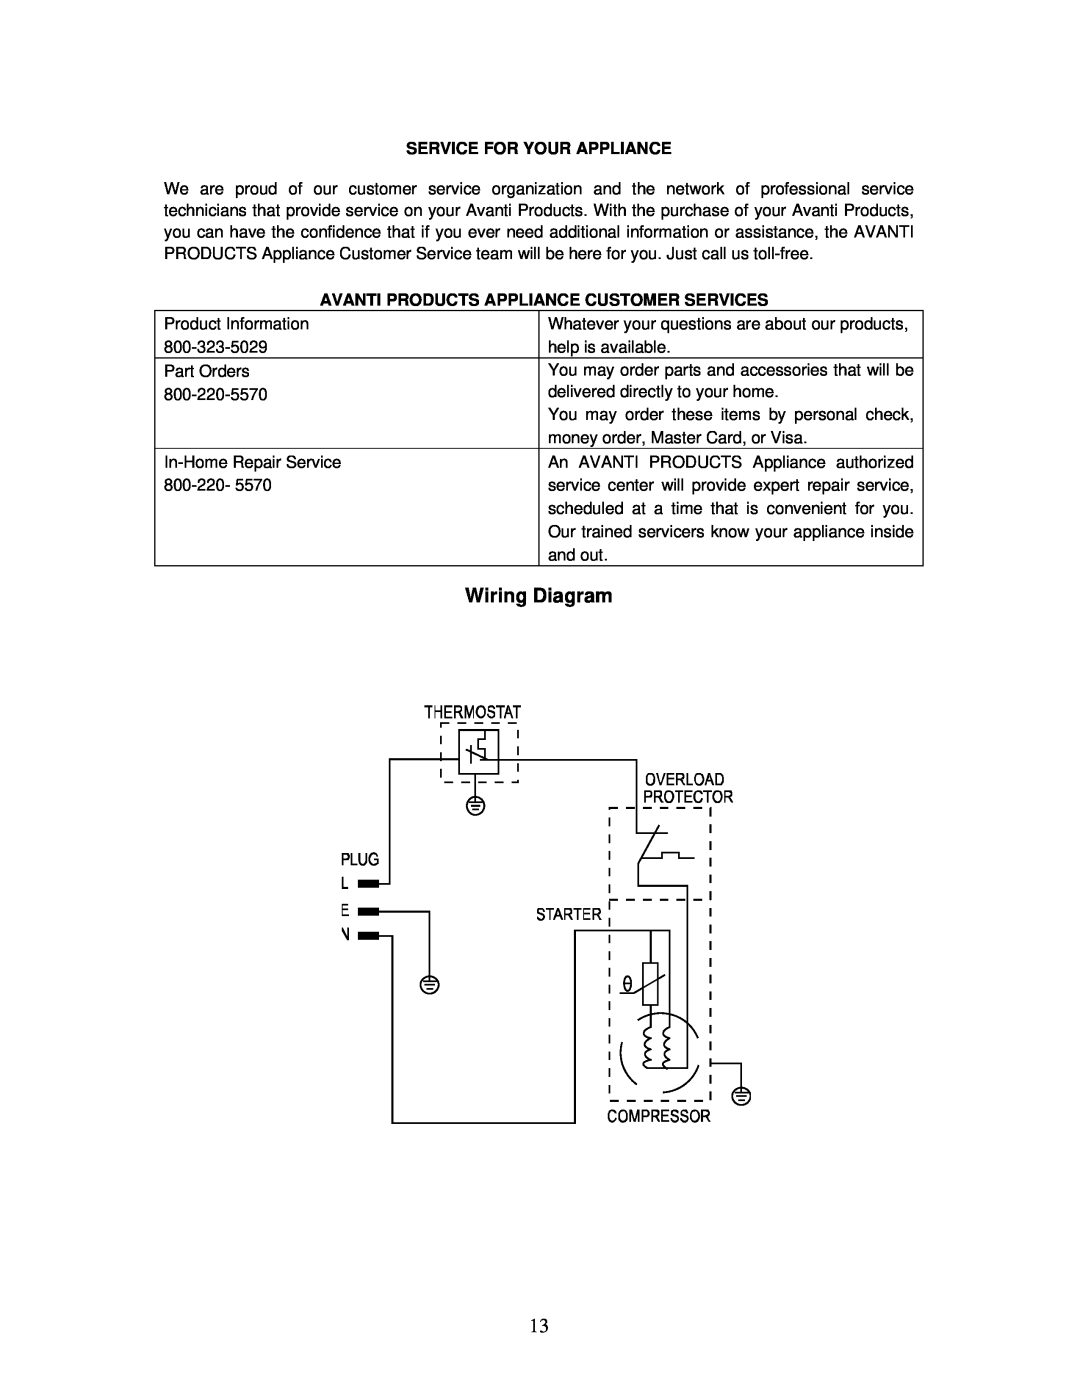 Avanti RM2411B instruction manual Wiring Diagram, Service For Your Appliance, Avanti Products Appliance Customer Services 